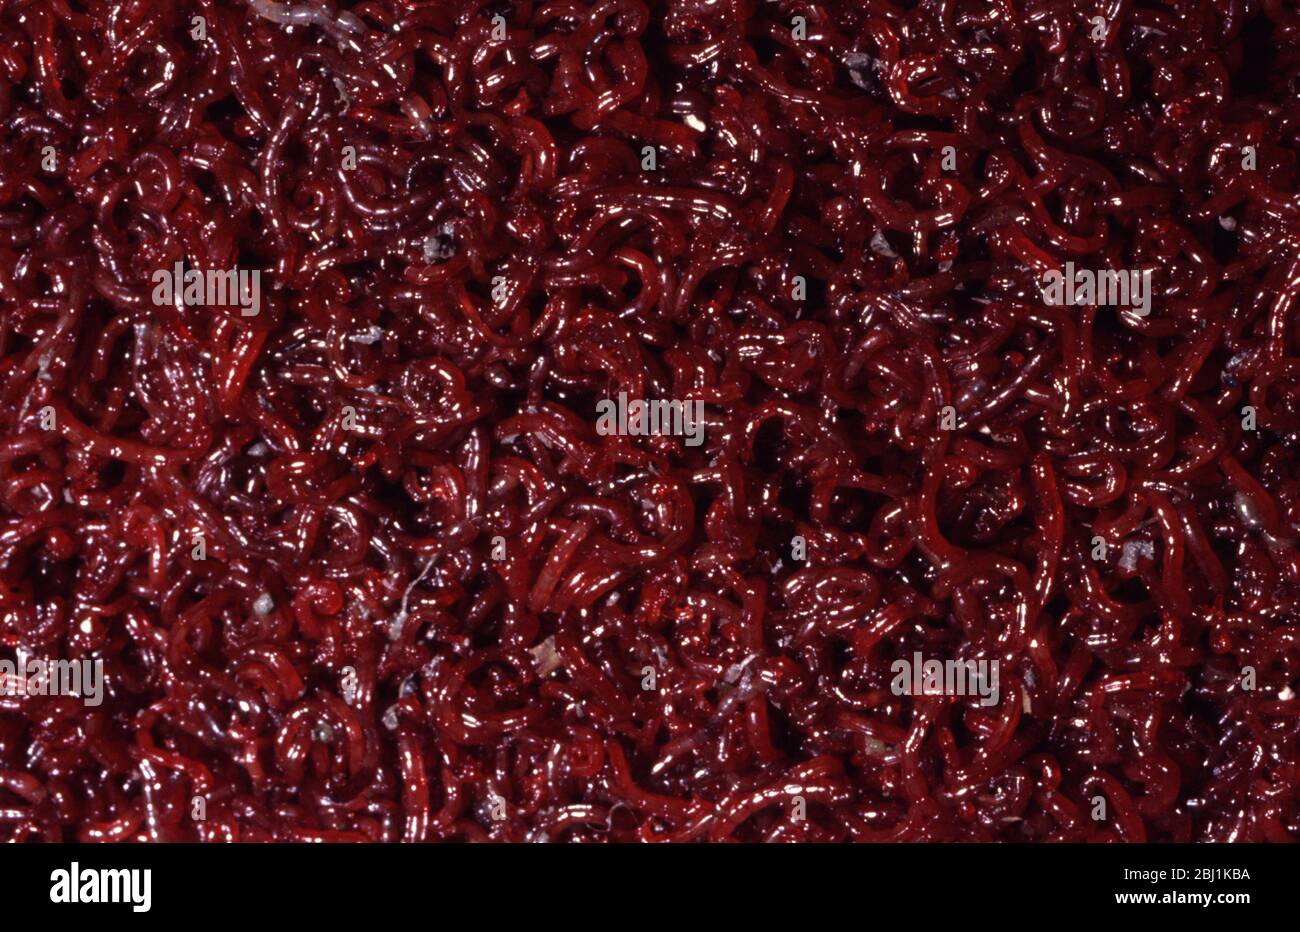 Bloodworms (Chironomus sp.) as live food for aquarium fishes Stock Photo -  Alamy